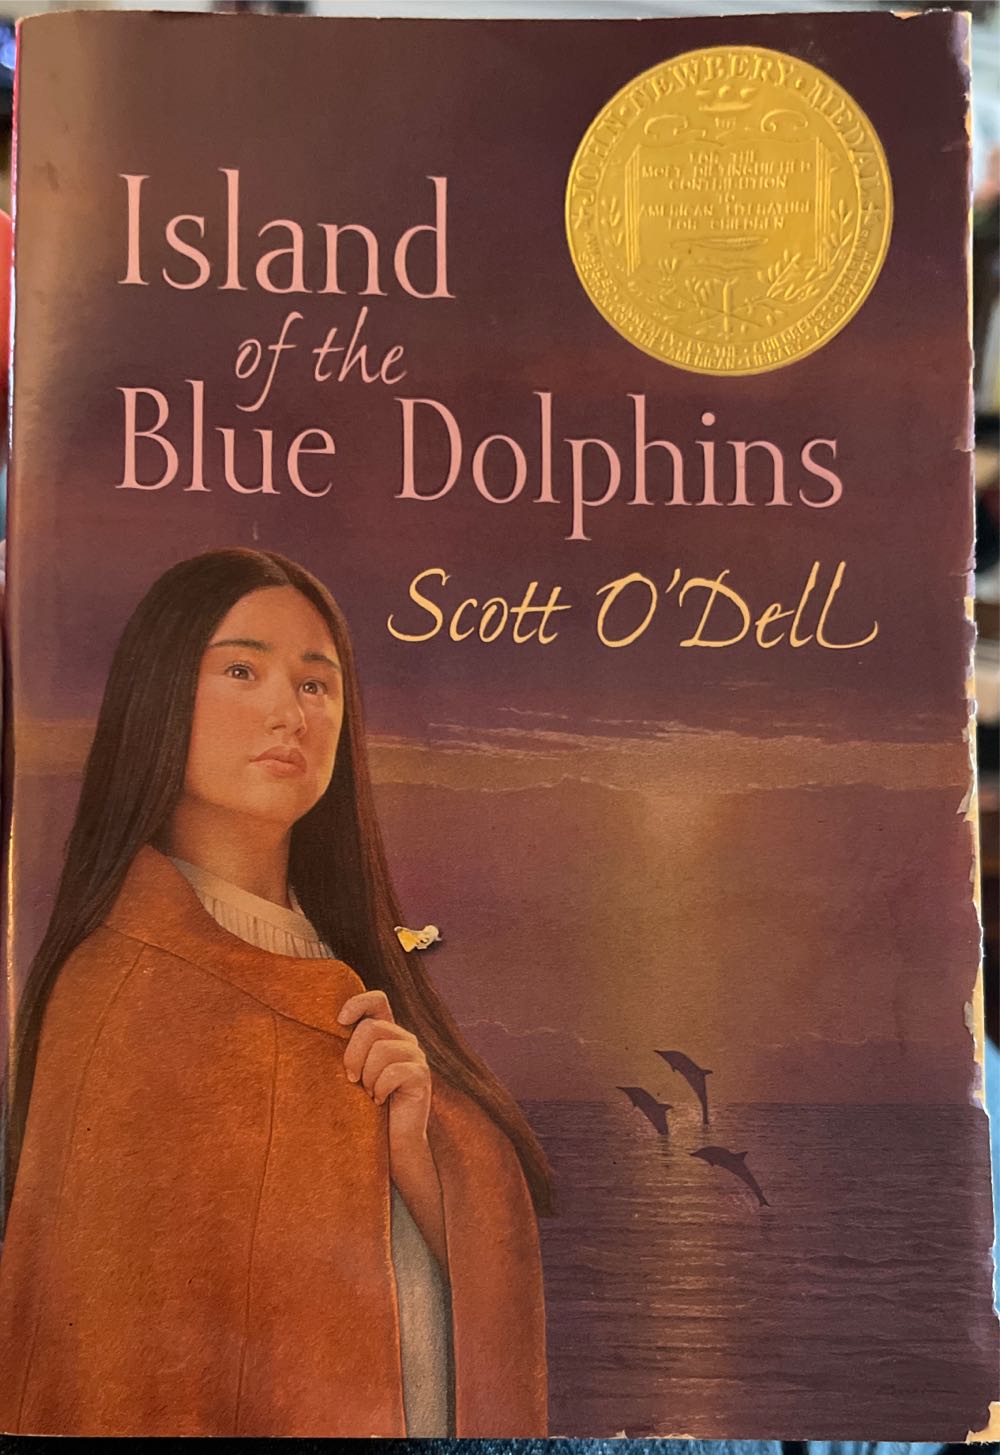 Island Of The Blue Dolphins - Scott Odell (Yearling - Paperback) book collectible [Barcode 9780440439882] - Main Image 3